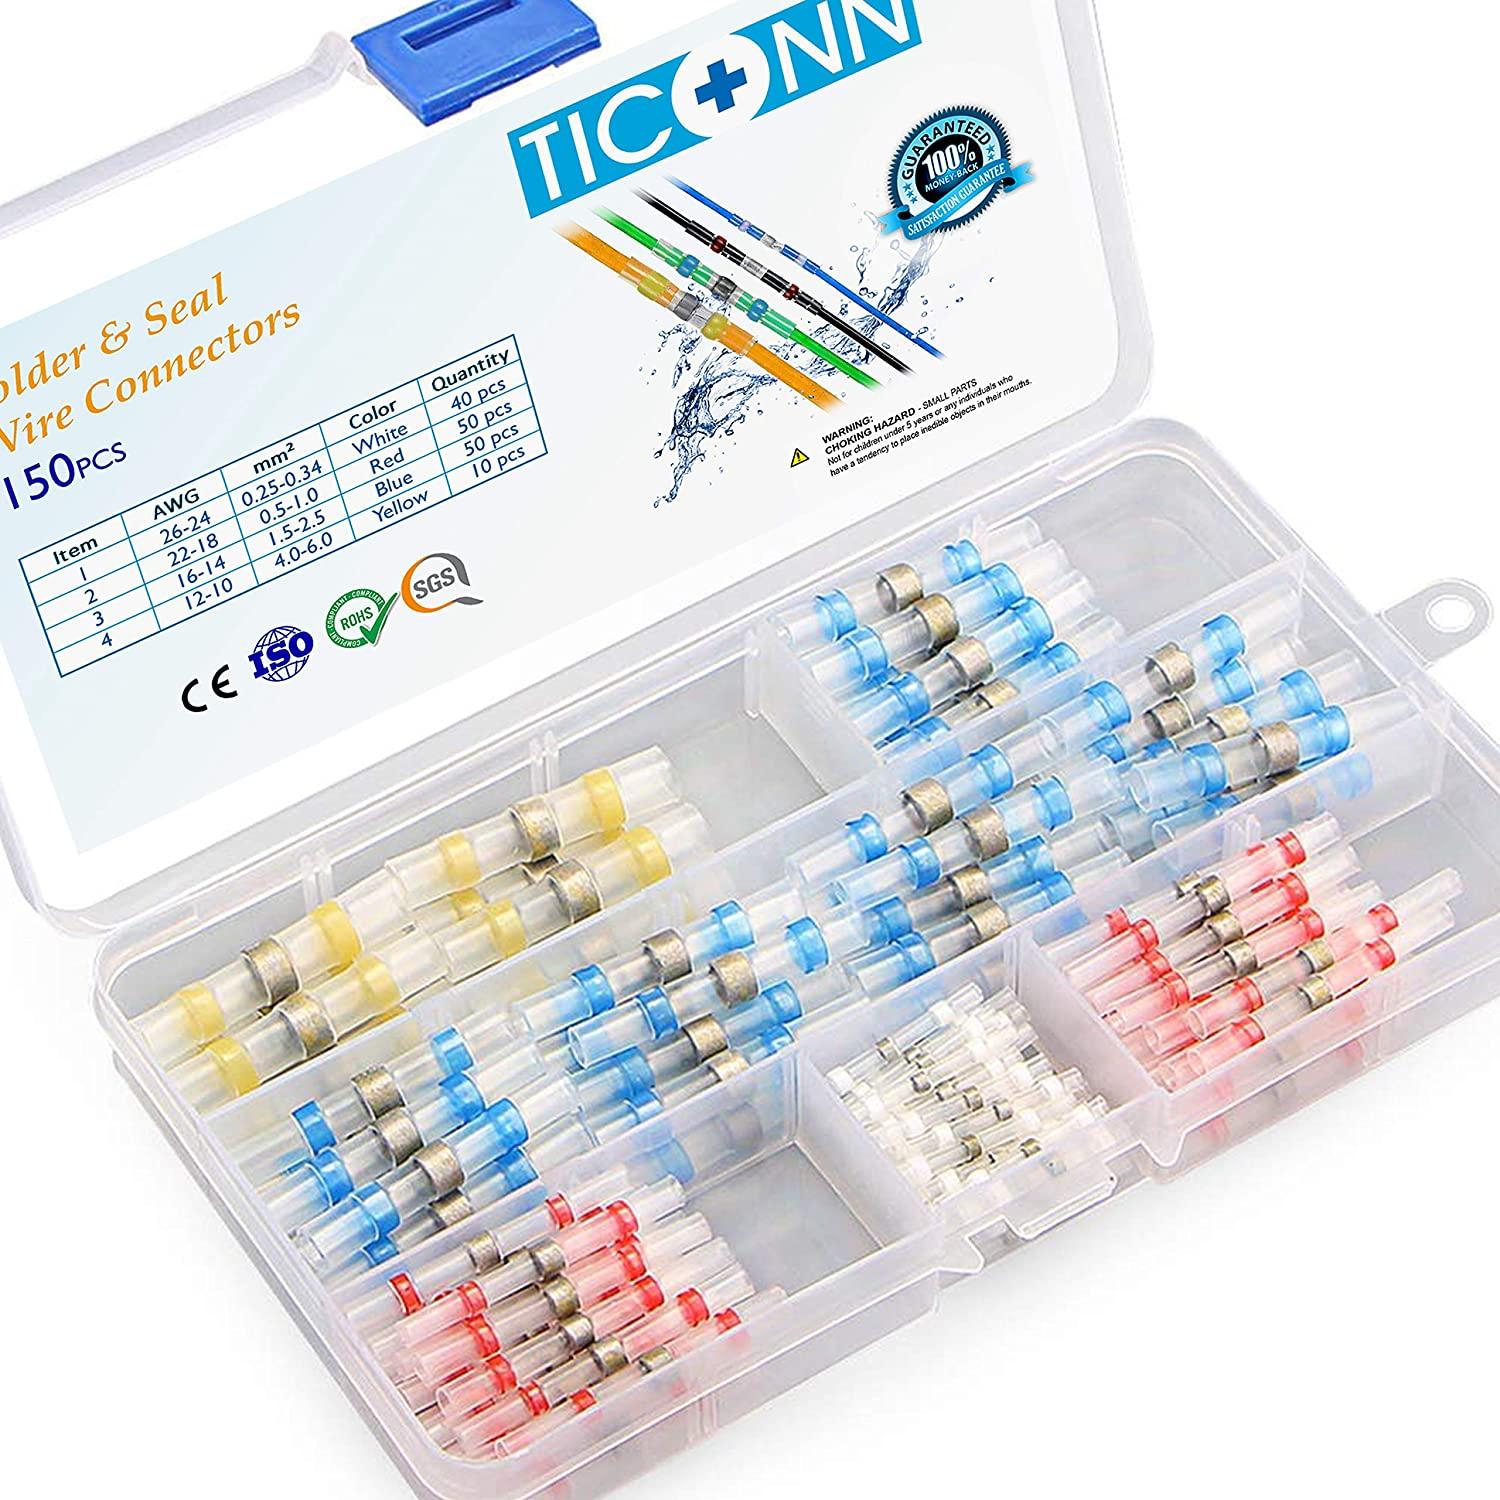 Ticonn 150-Pieces Solder Seal Wire Connectors and Terminals for $8.41 Shipped